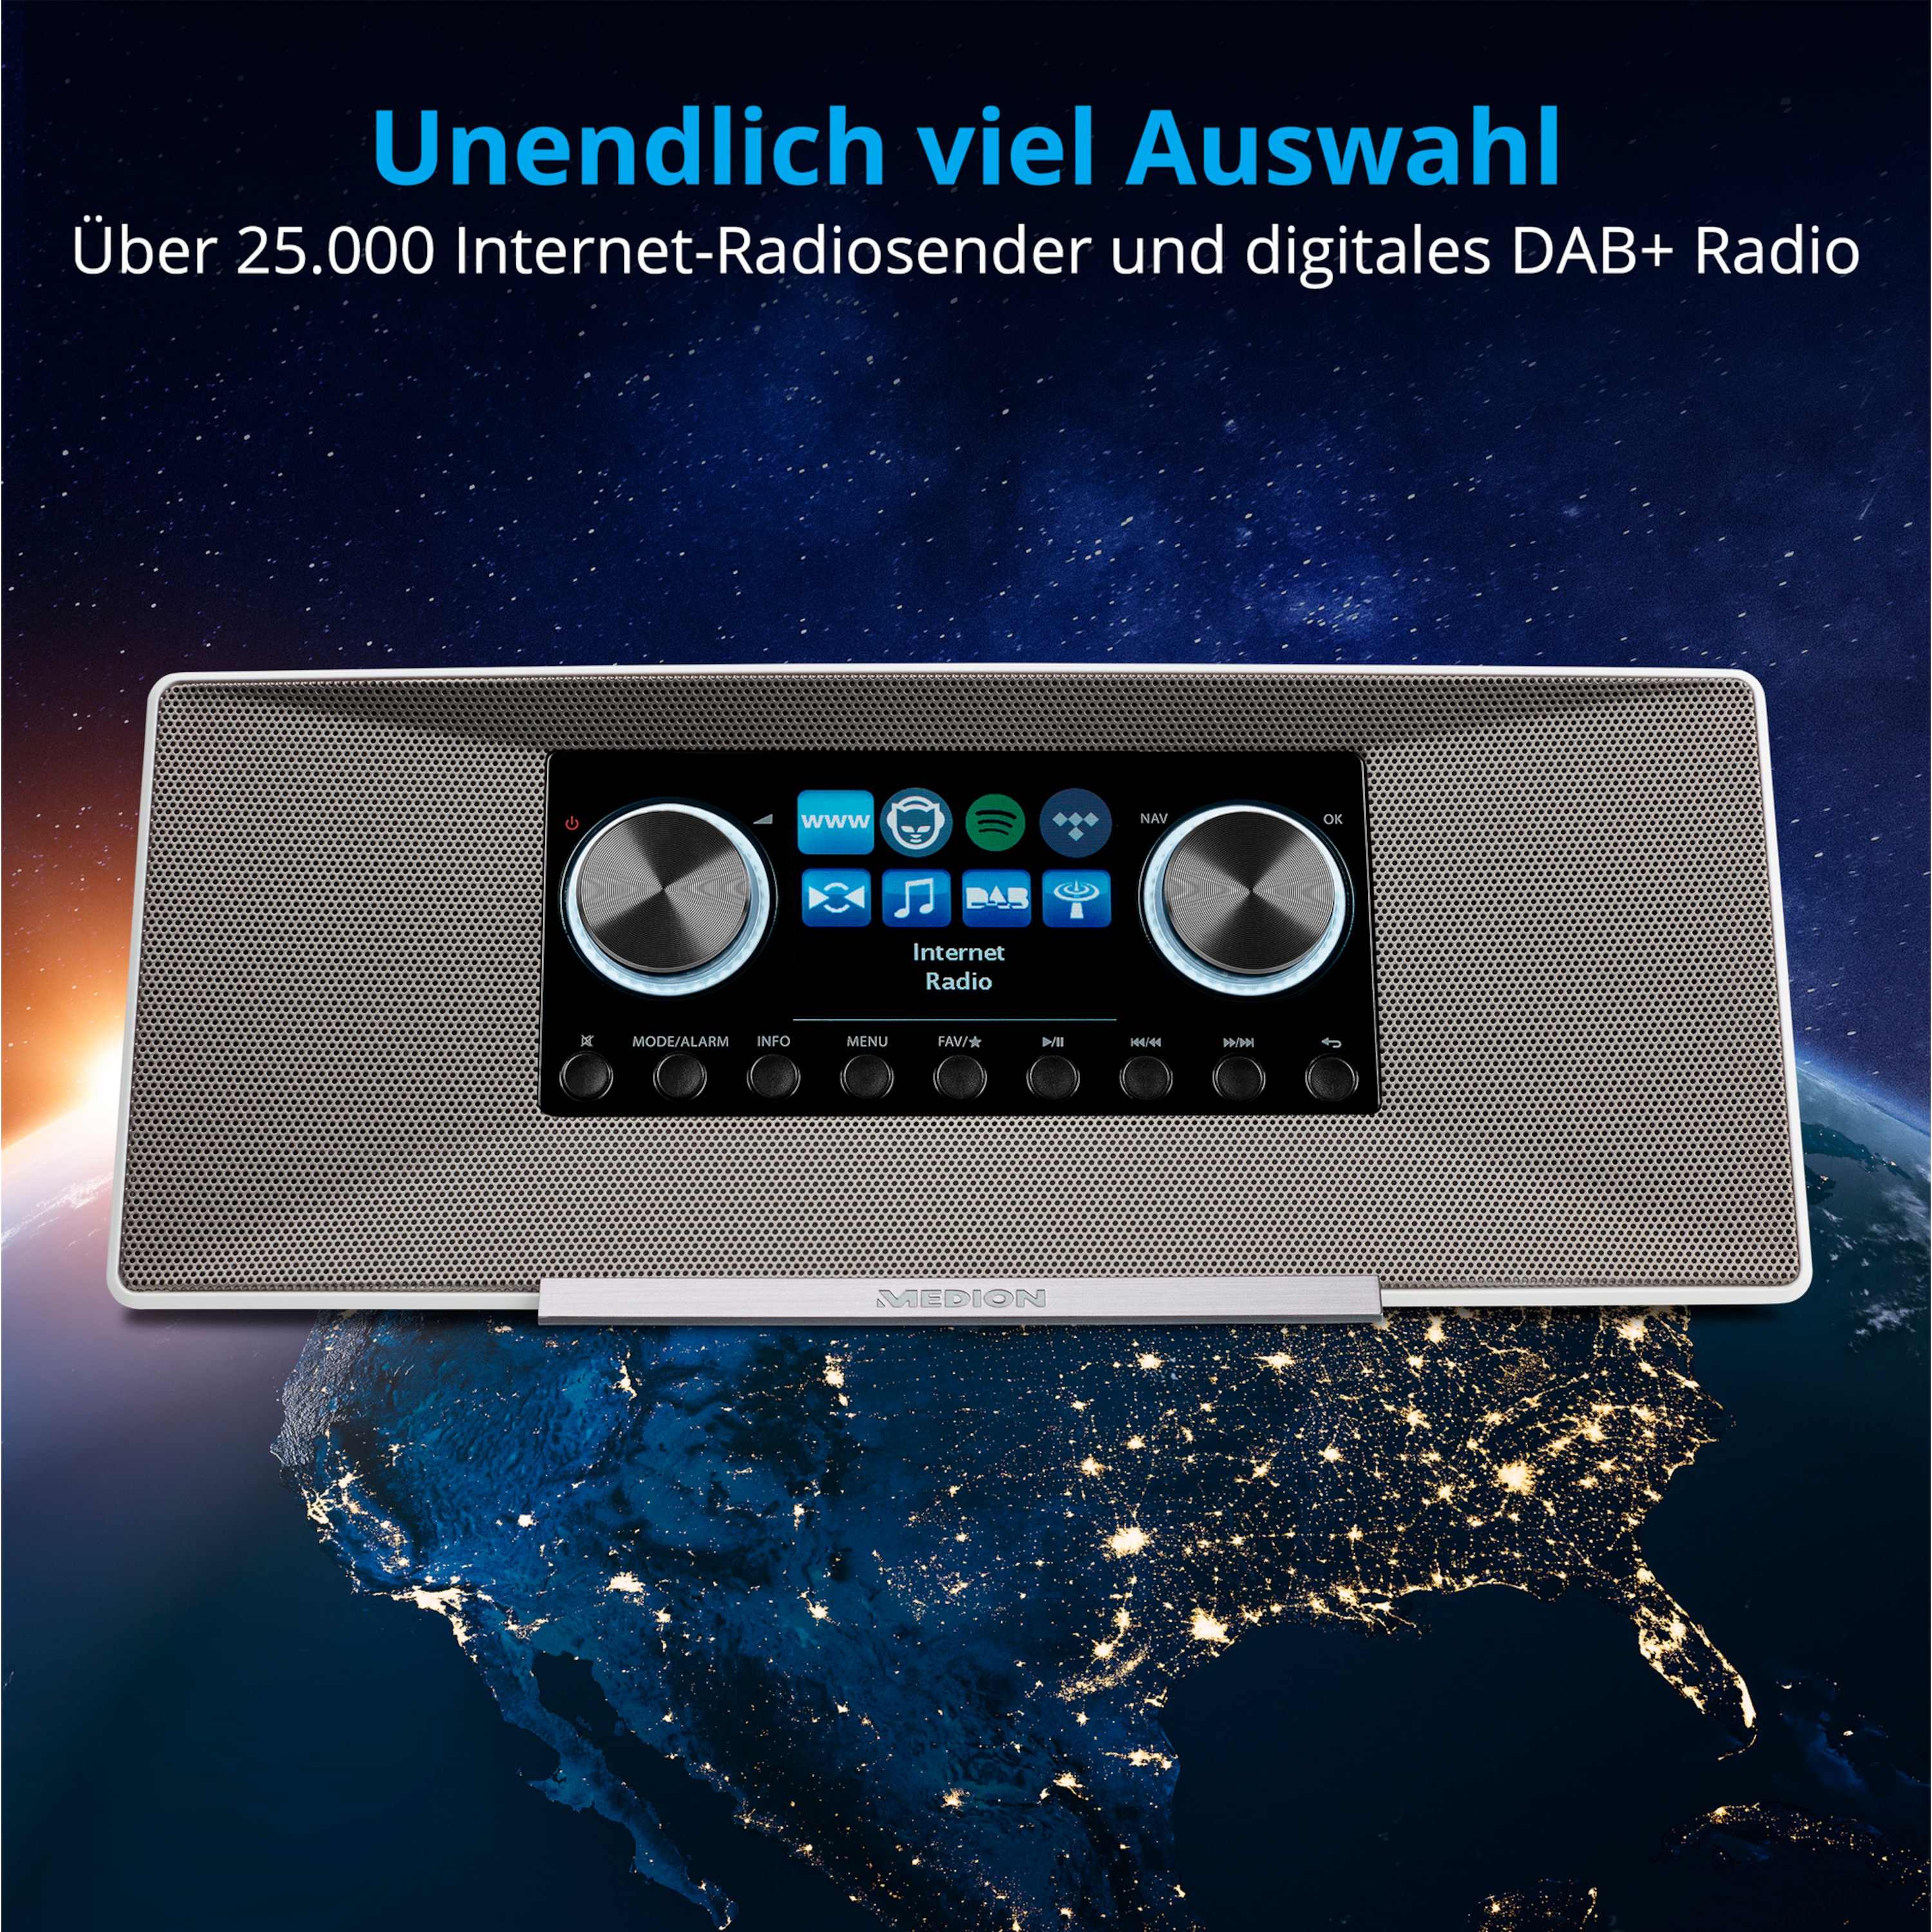 MEDION® P85289 Stereo Internetradio, 7,1 cm (2,8'') TFT-Display, DAB+/UKW-Empfänger, WLAN, DLNA, Spotify®-Connect, 2 x 6 W RMS